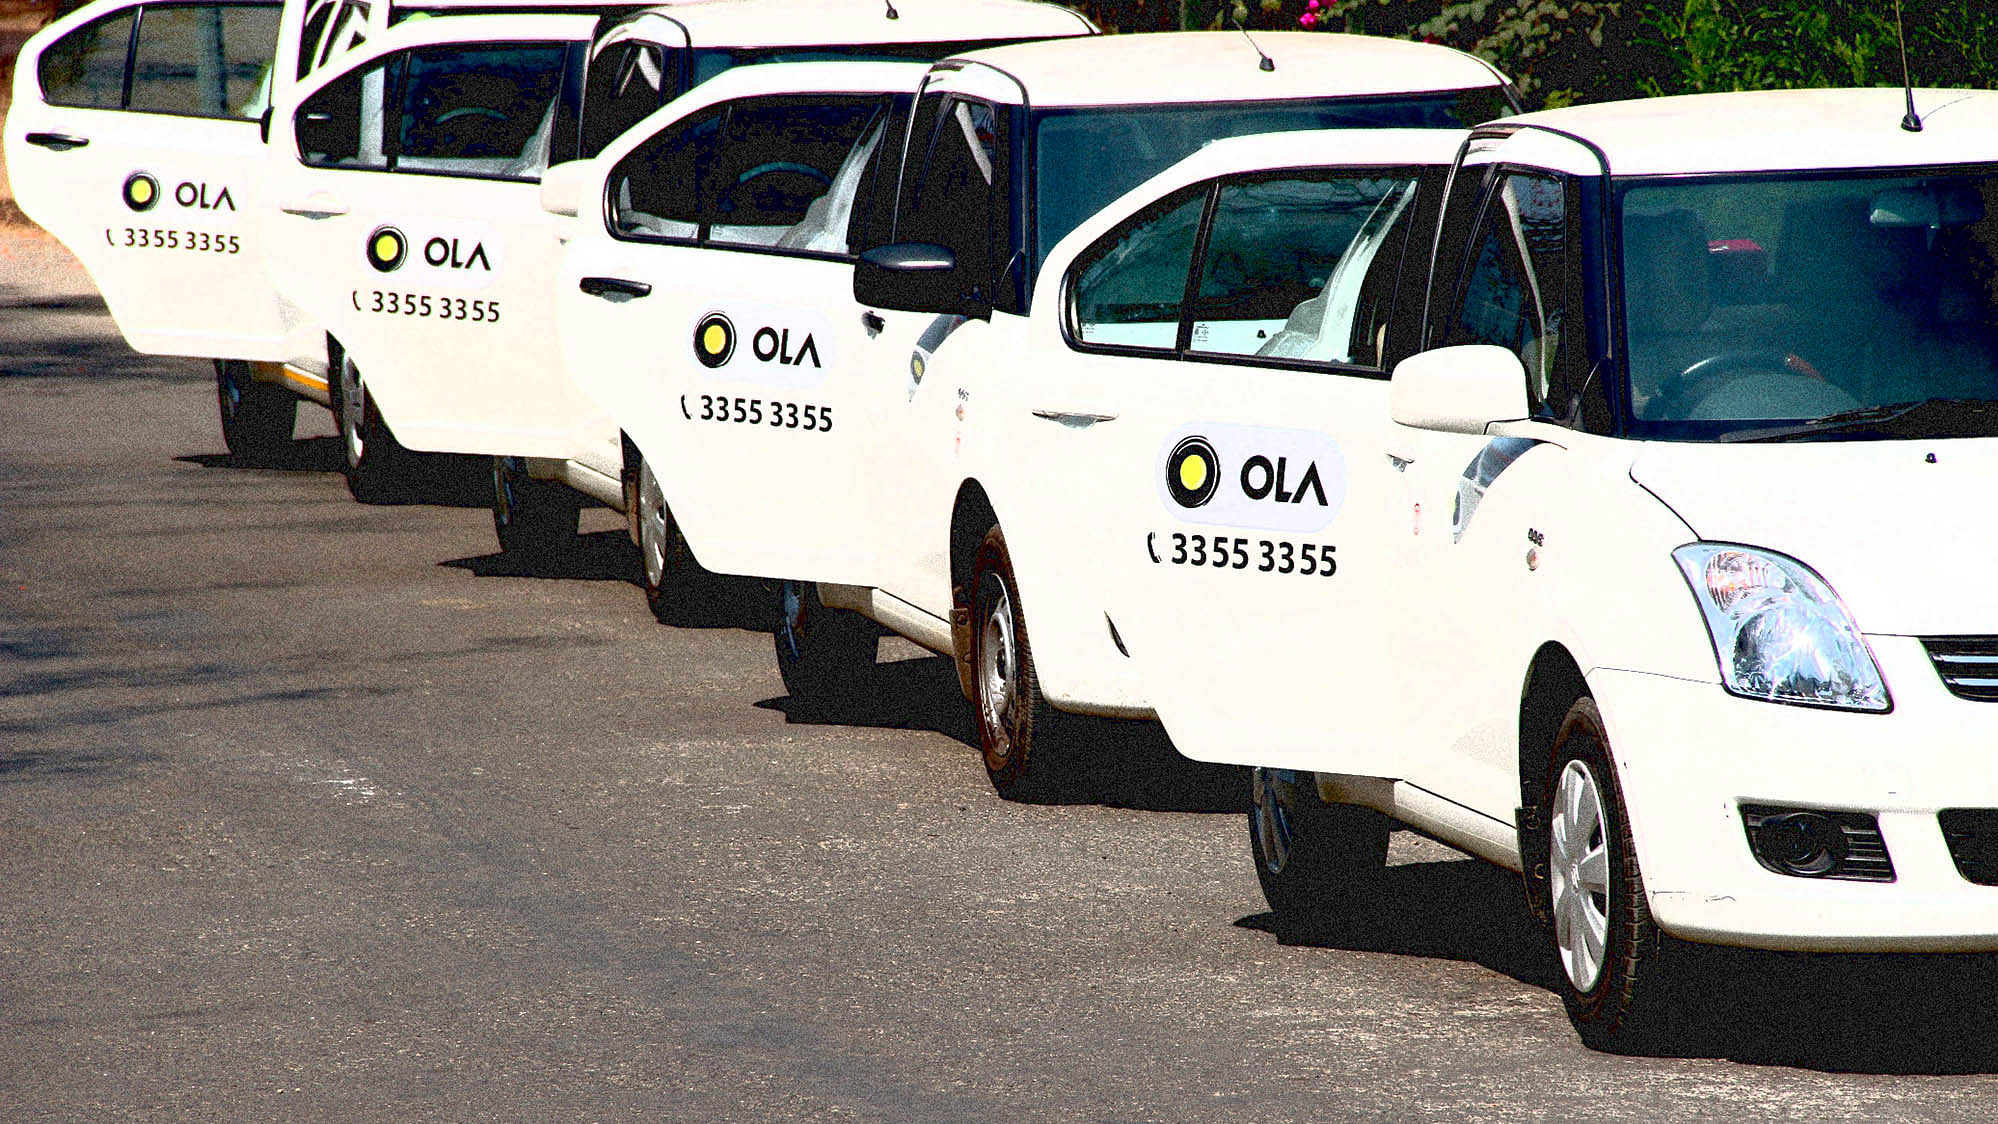 Ola has suspended services for the duration of the COVID-19 national lockdown.